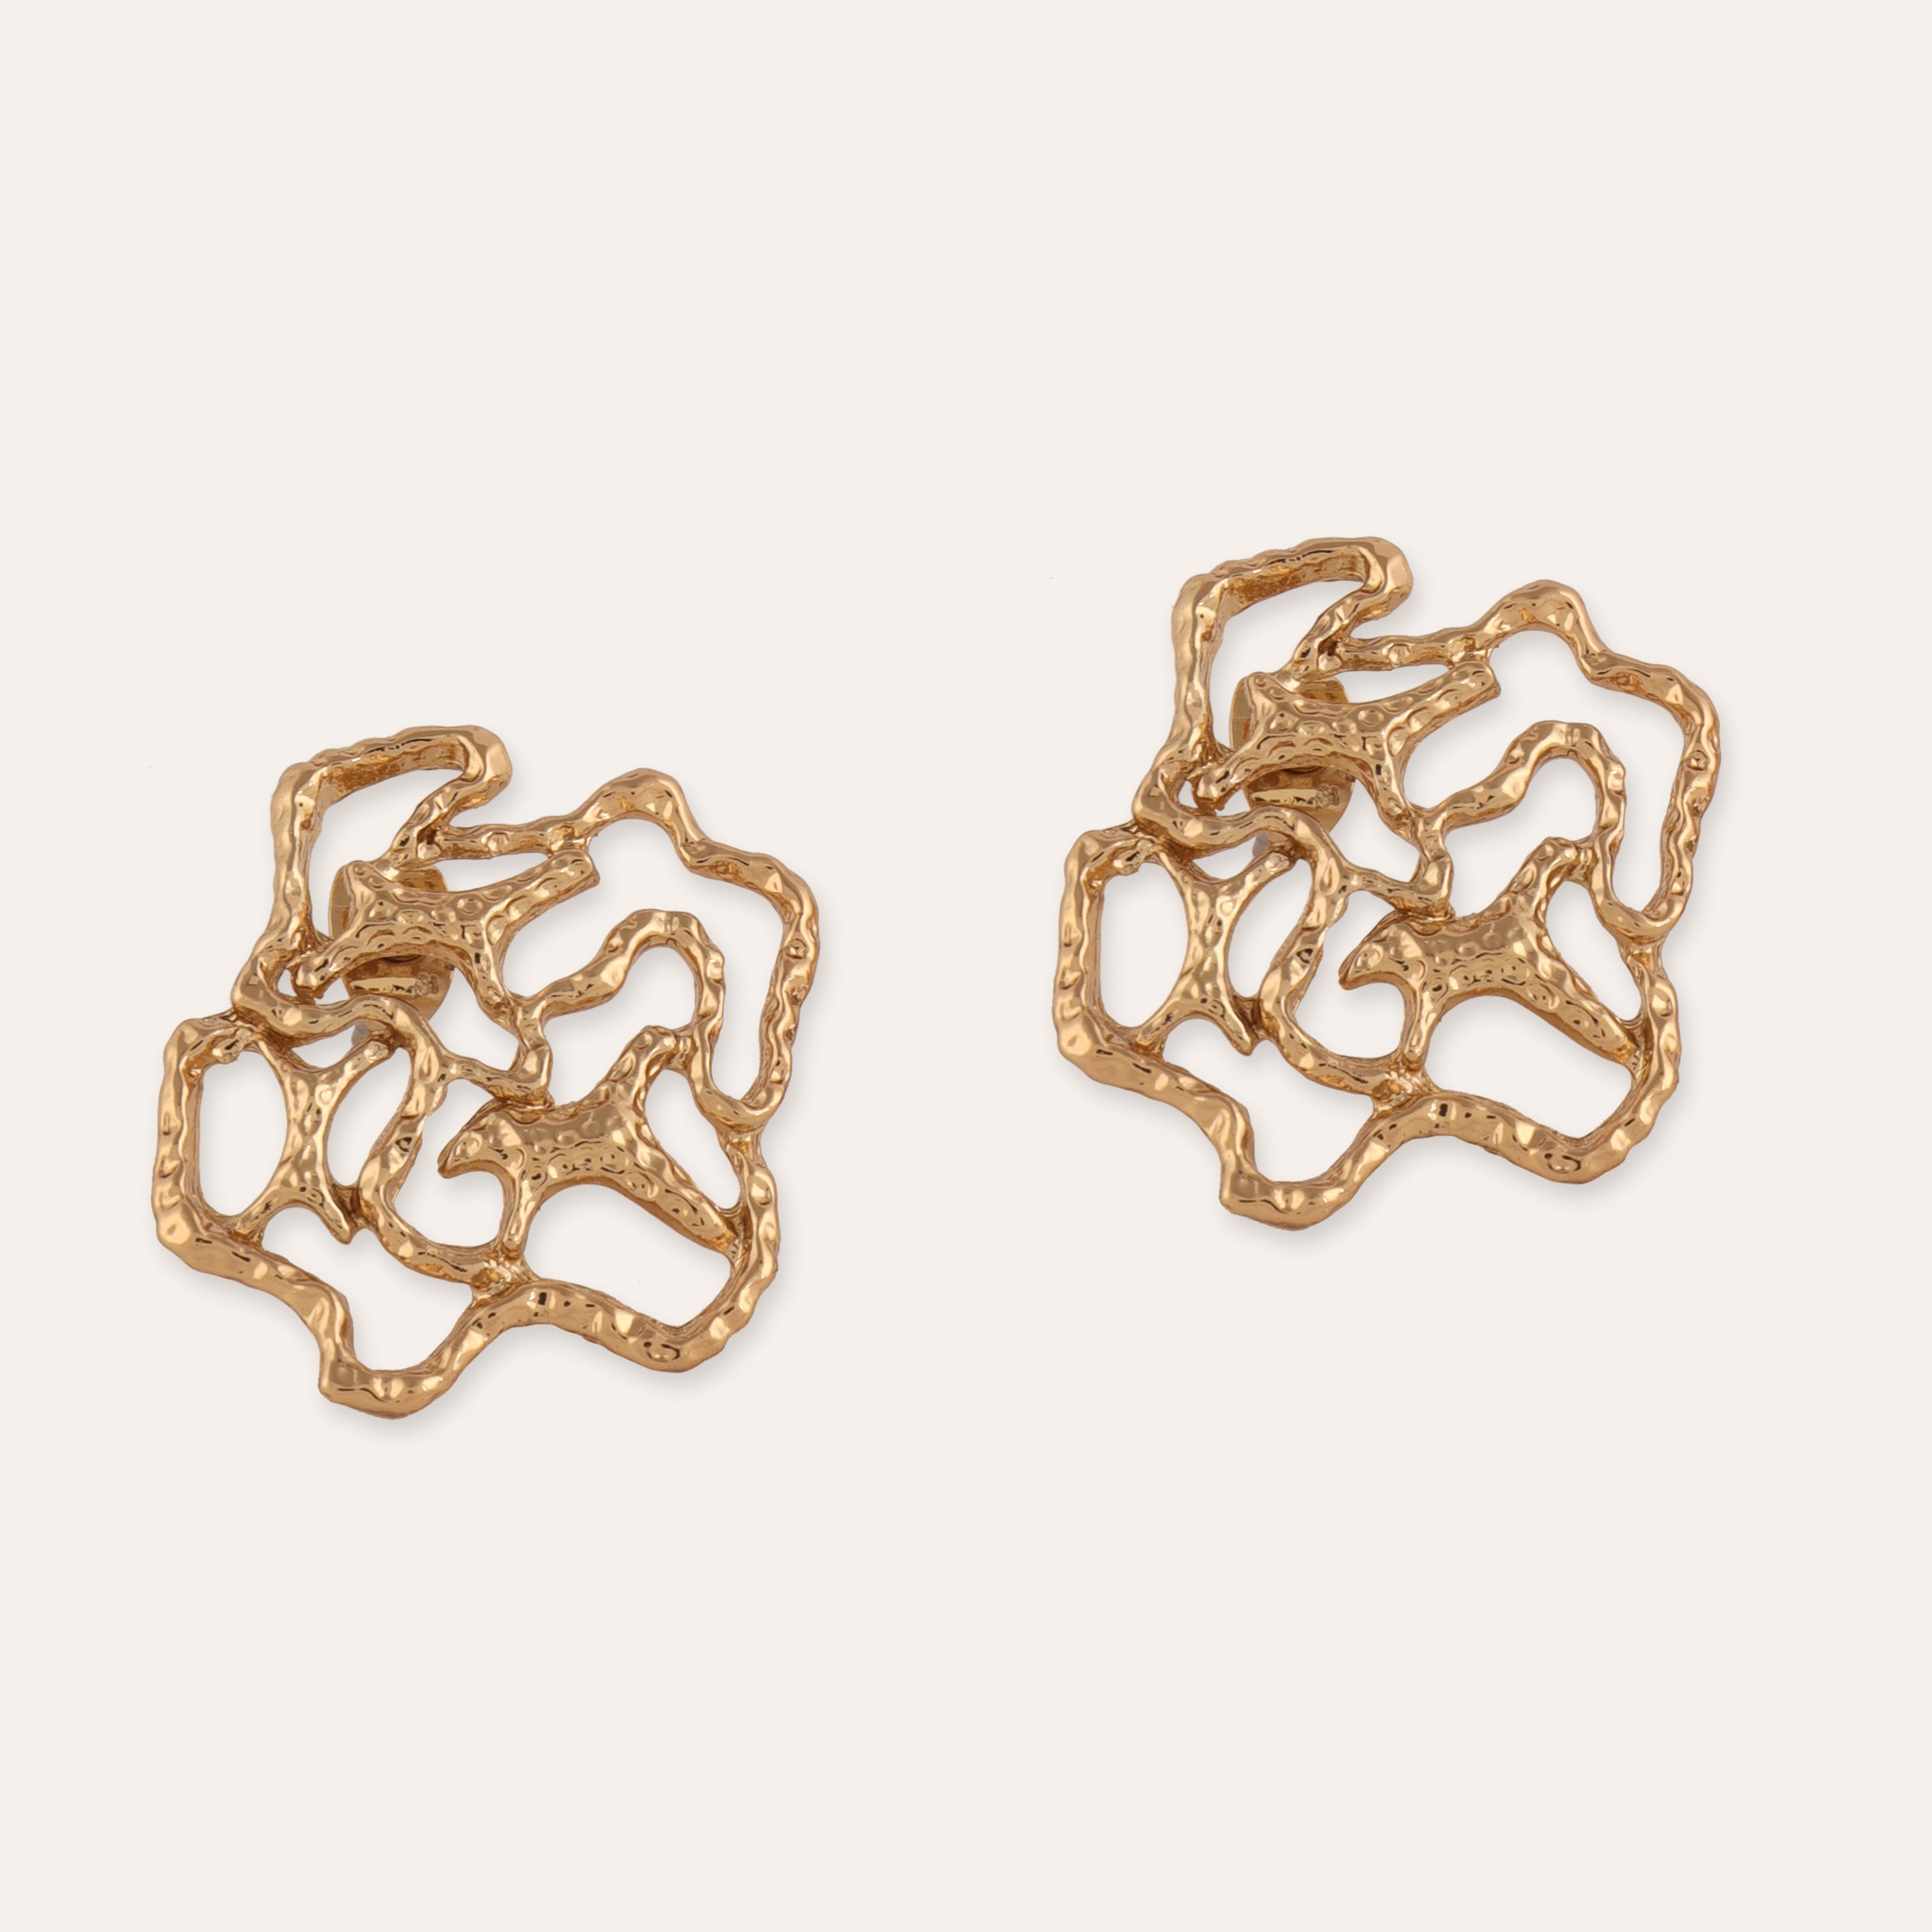 TFC Fancy finesse gold plated stud earrings- Discover daily wear gold earrings including stud earrings, hoop earrings, and pearl earrings, perfect as earrings for women and earrings for girls.Find the cheapest fashion jewellery which is anti-tarnis​h only at The Fun company.